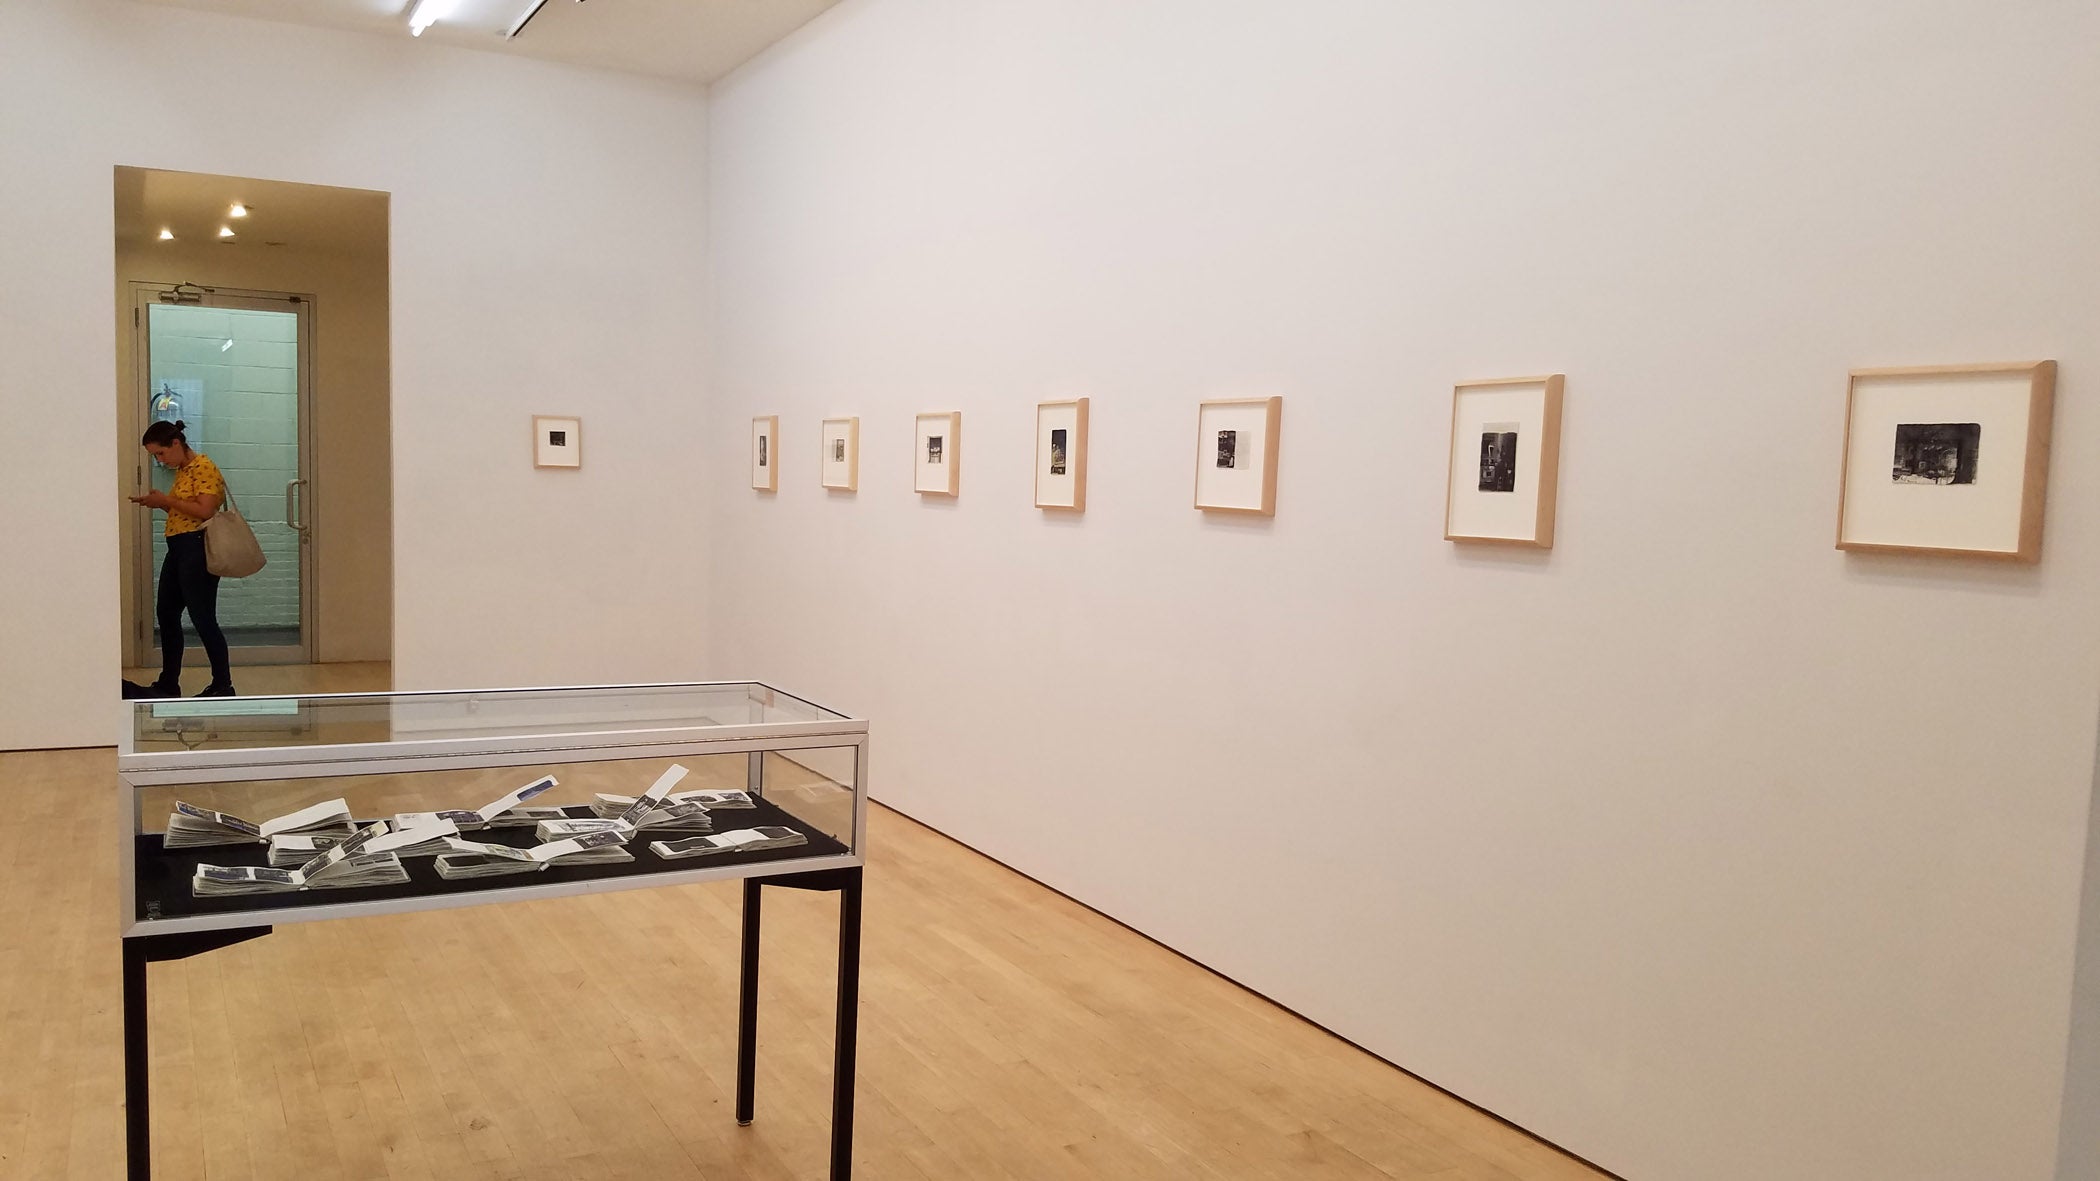 Photograph of the exhibition Charles Ritchie 16 Pages at BravinLee programs, New York, 7 September to 14 October 2017 image